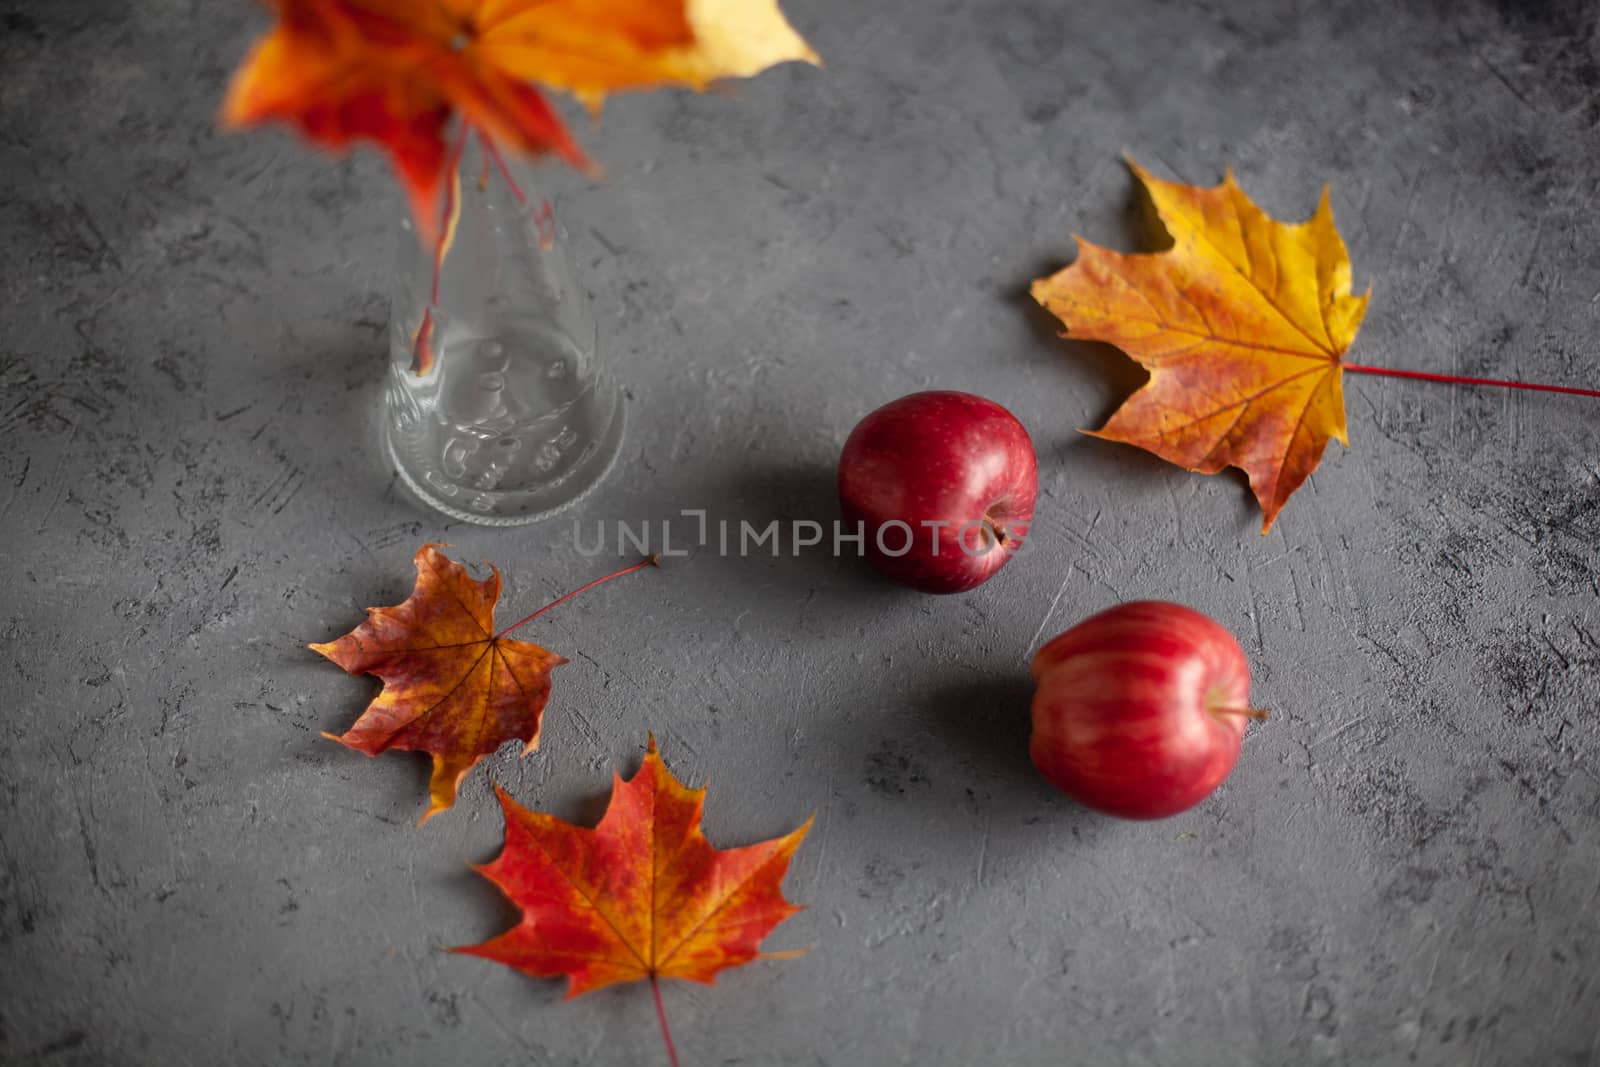 Autumn marple leaves and Ripe garden red apples on gray concrete. Fruits concept of the fall harvest. Space for text.